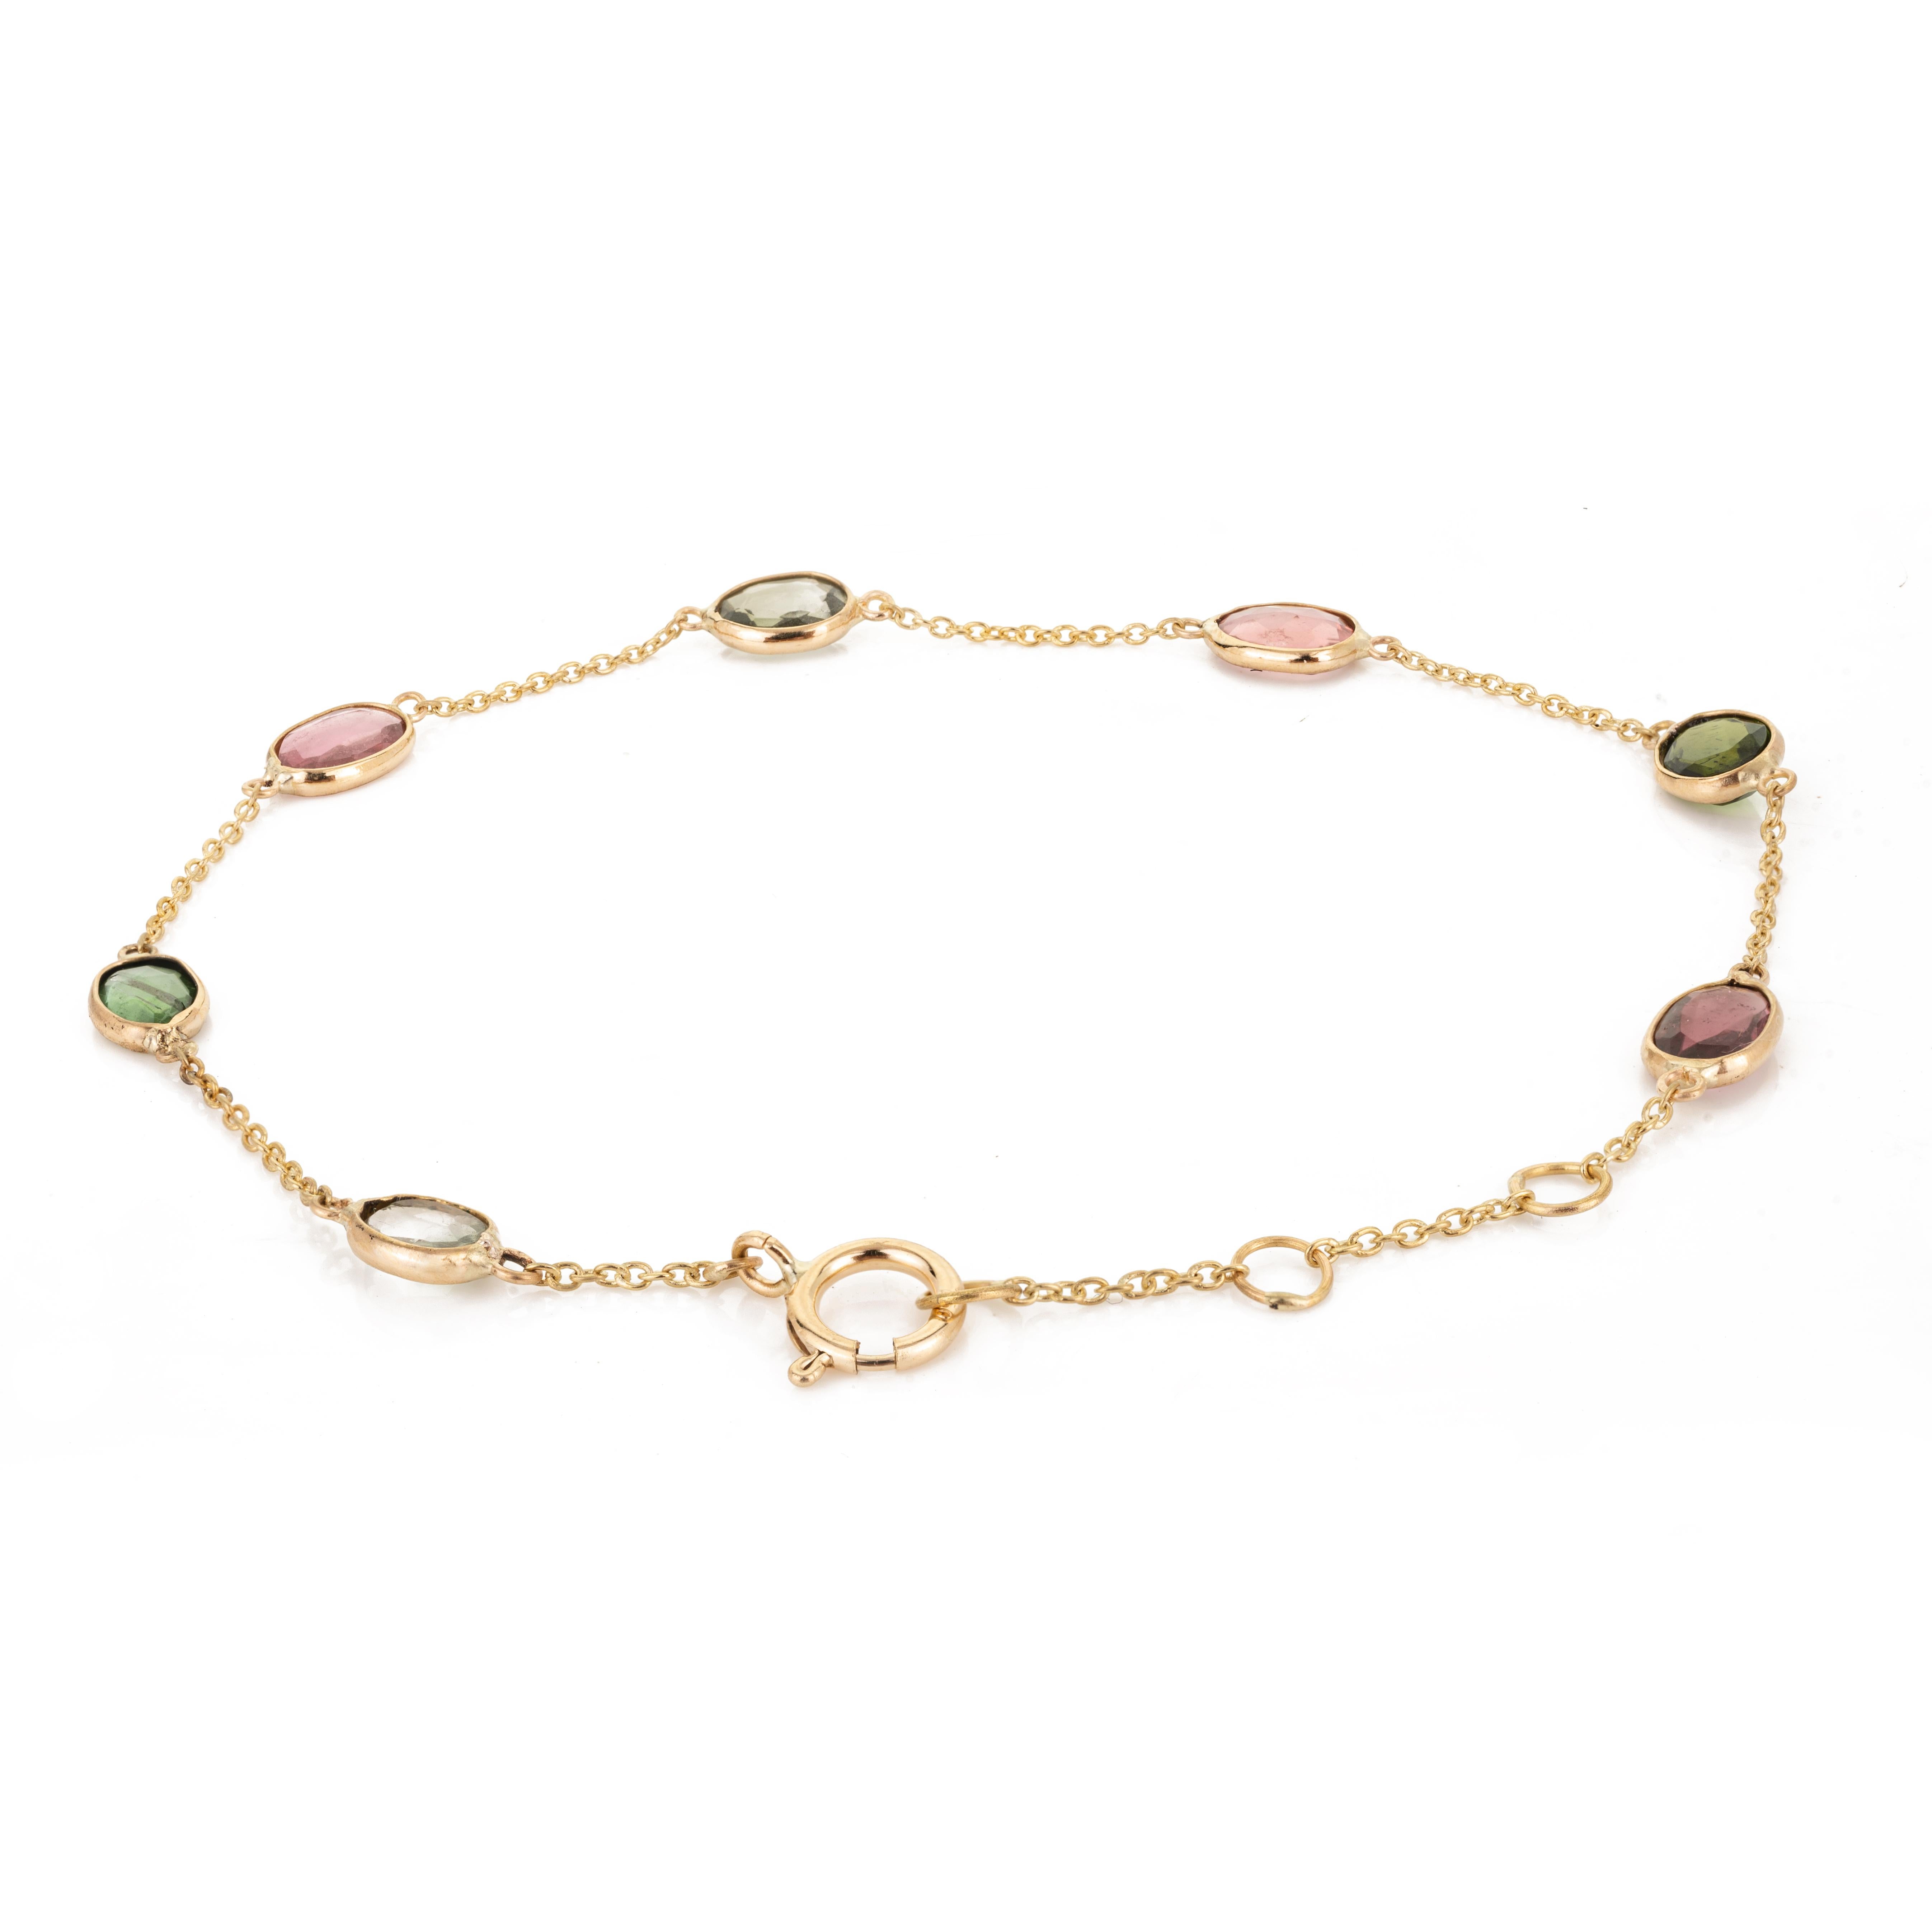 Multi Tourmaline Station Chain Bracelet Handcrafted in 18k Yellow Gold In New Condition For Sale In Houston, TX